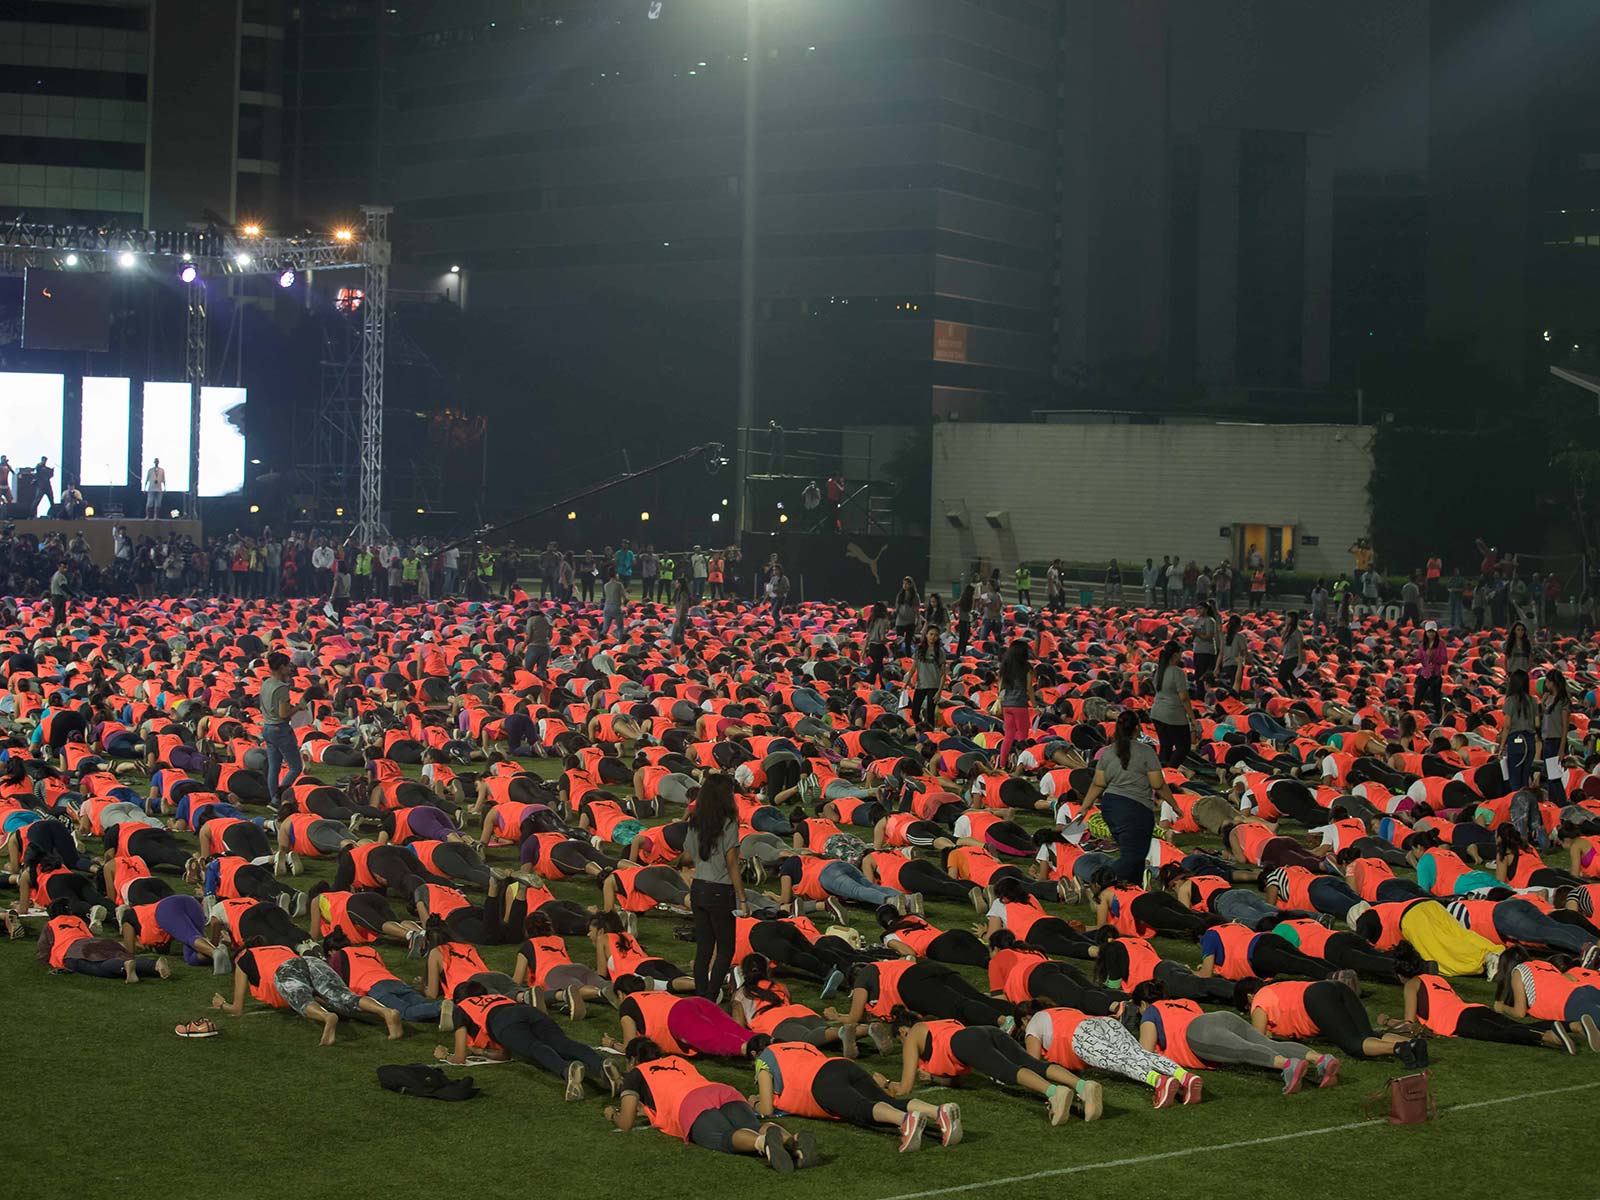 1623 women including the POPxo Team and Plixxo Bloggers successfully setting a new Guinness World Record for holding the abdominal plank simultaneously